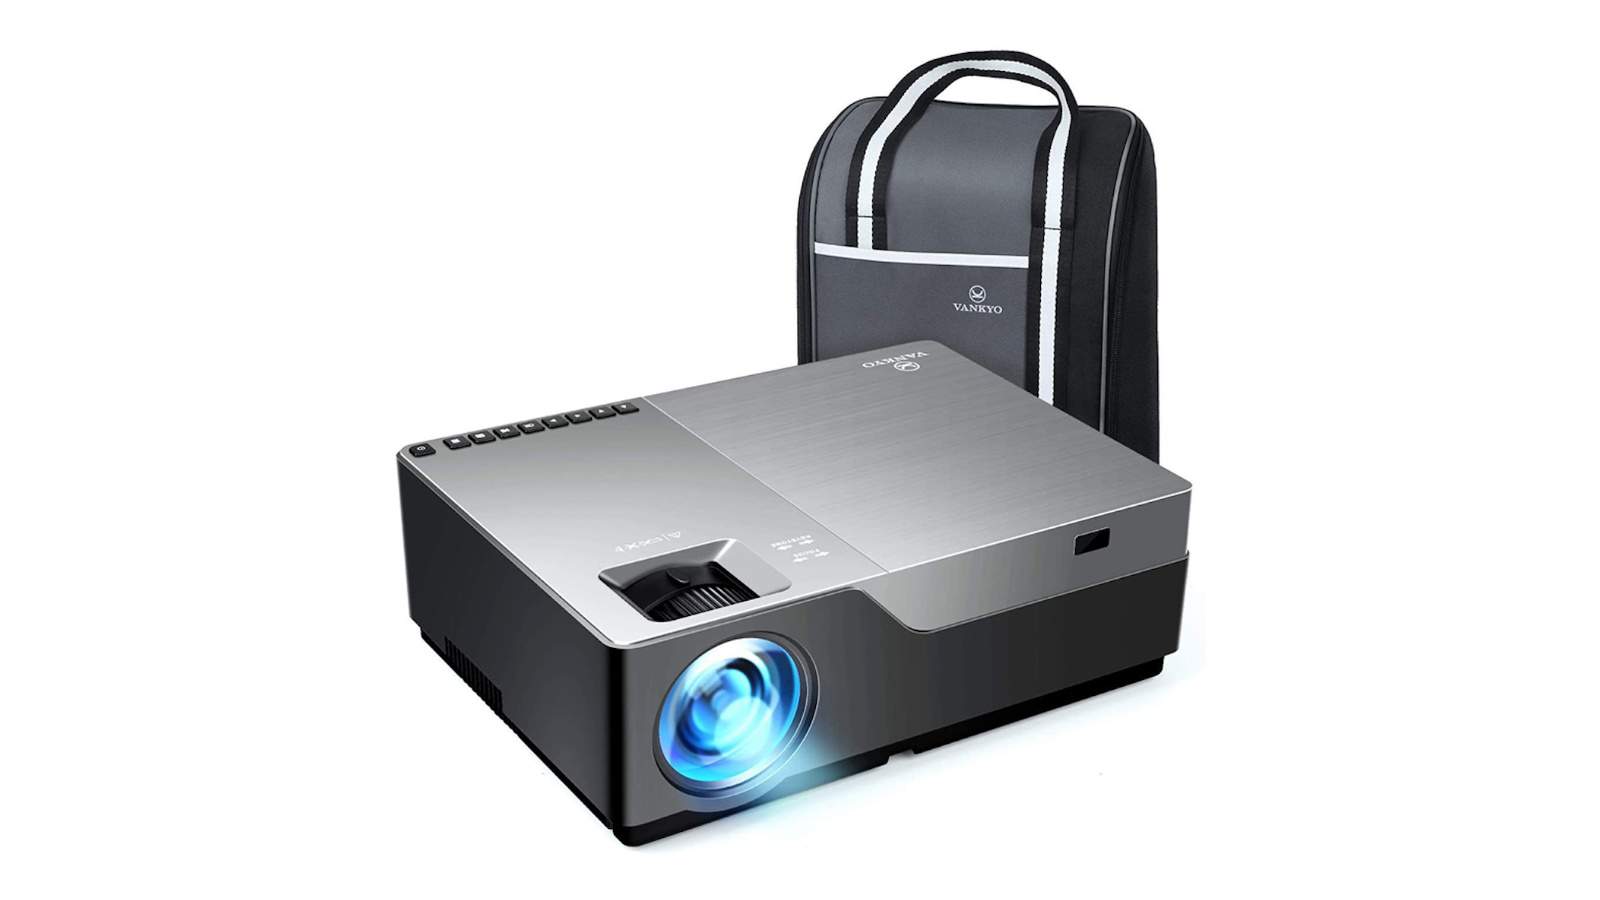 Bring the theater experience in the comfort of your home with this HD LED projector